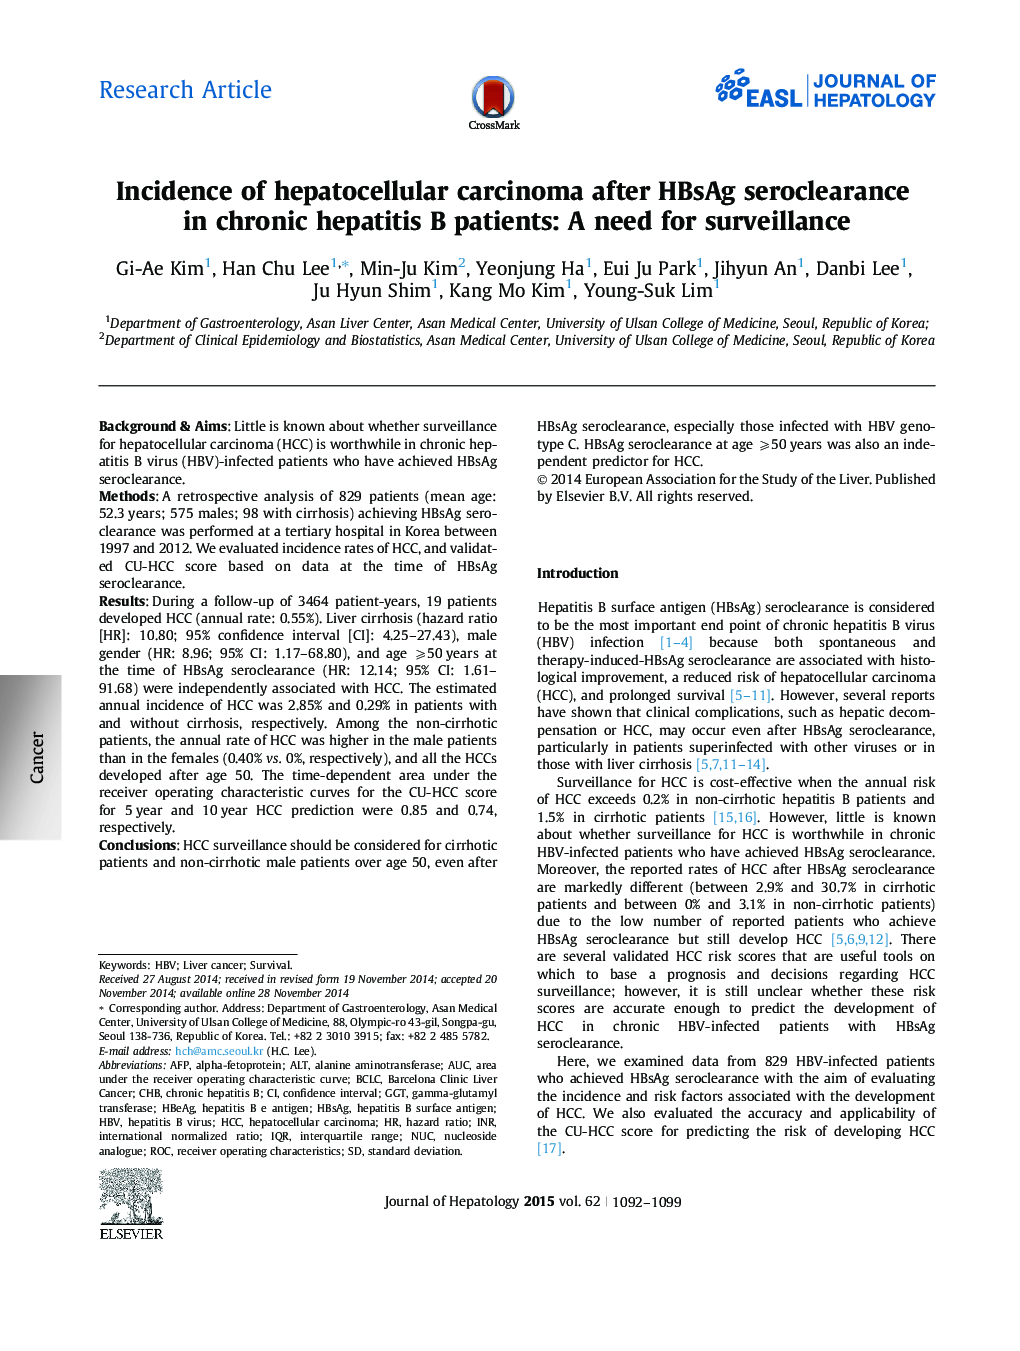 Research ArticleIncidence of hepatocellular carcinoma after HBsAg seroclearance in chronic hepatitis B patients: A need for surveillance